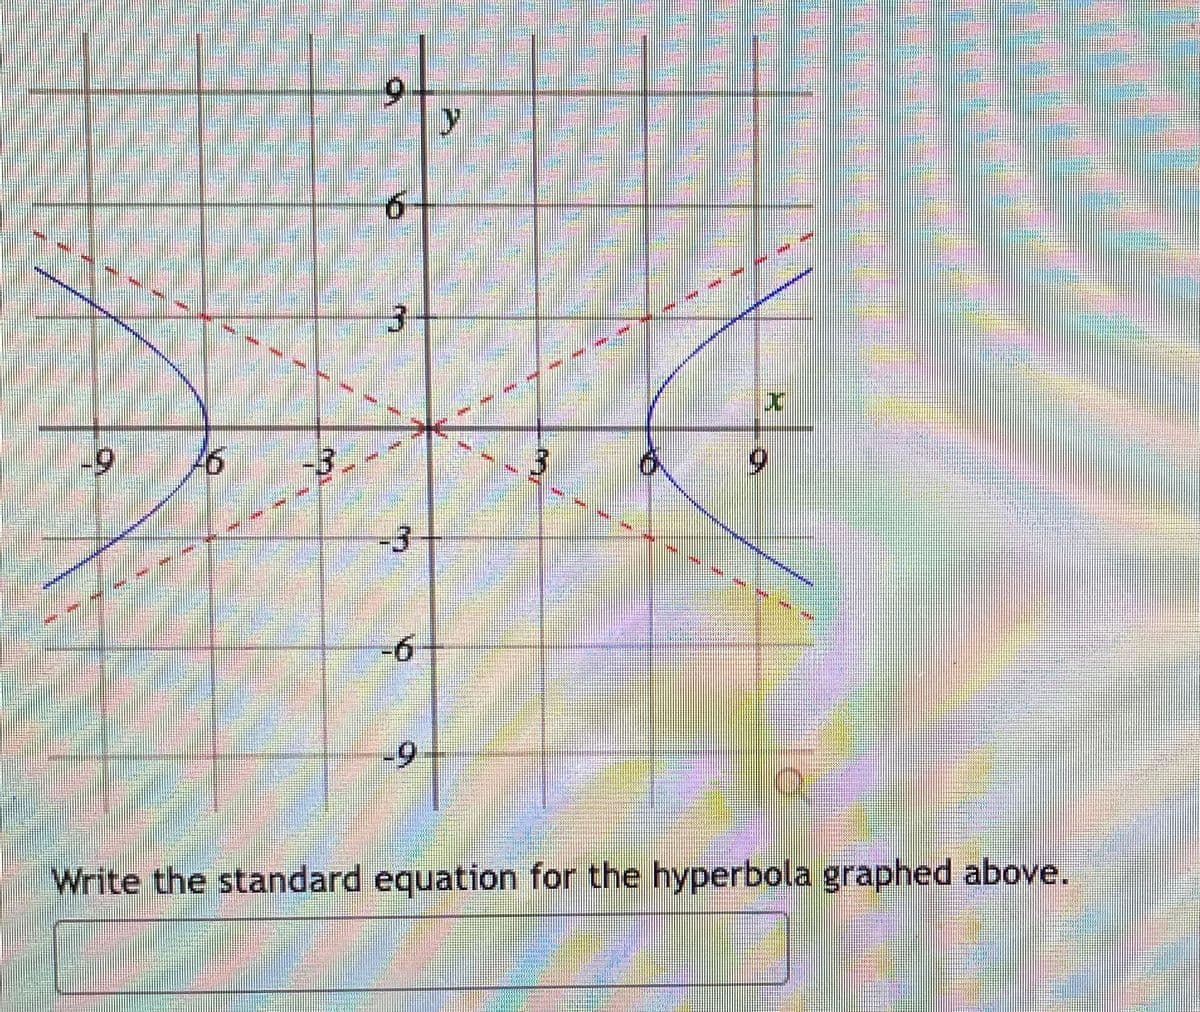 3.
6.
-3
-6
6.
Write the standard equation for the hyperbola graphed above.
